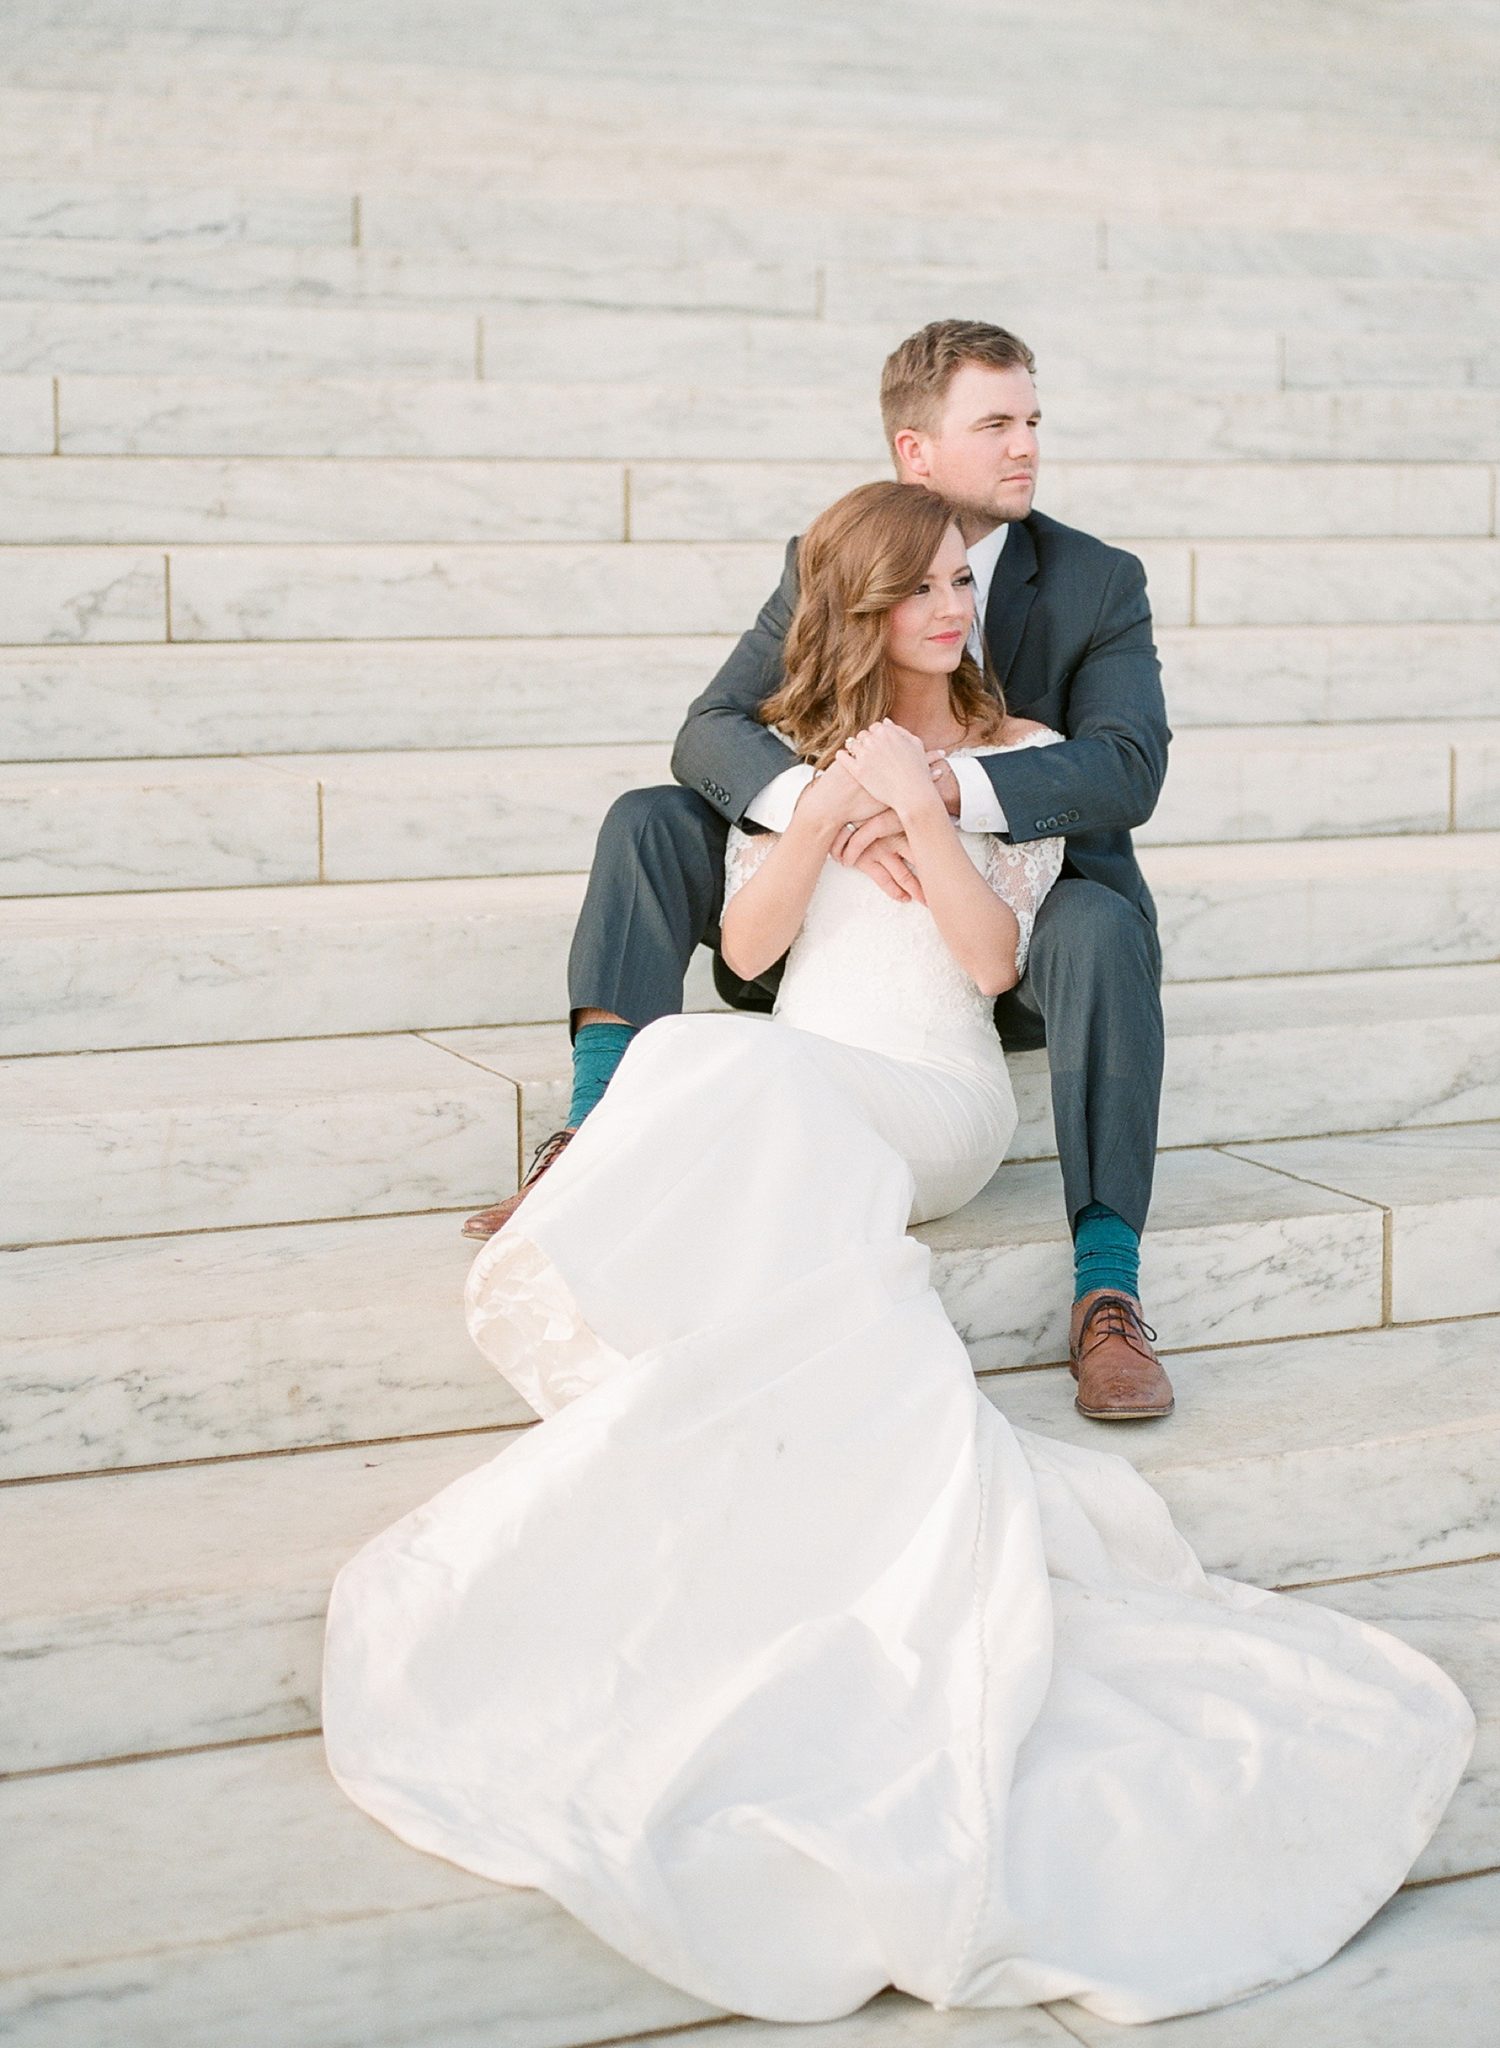 These stunning photos were taken during a spring wedding at the Jefferson Memorial in Washington, DC during peak bloom of the infamous cherry blossoms.